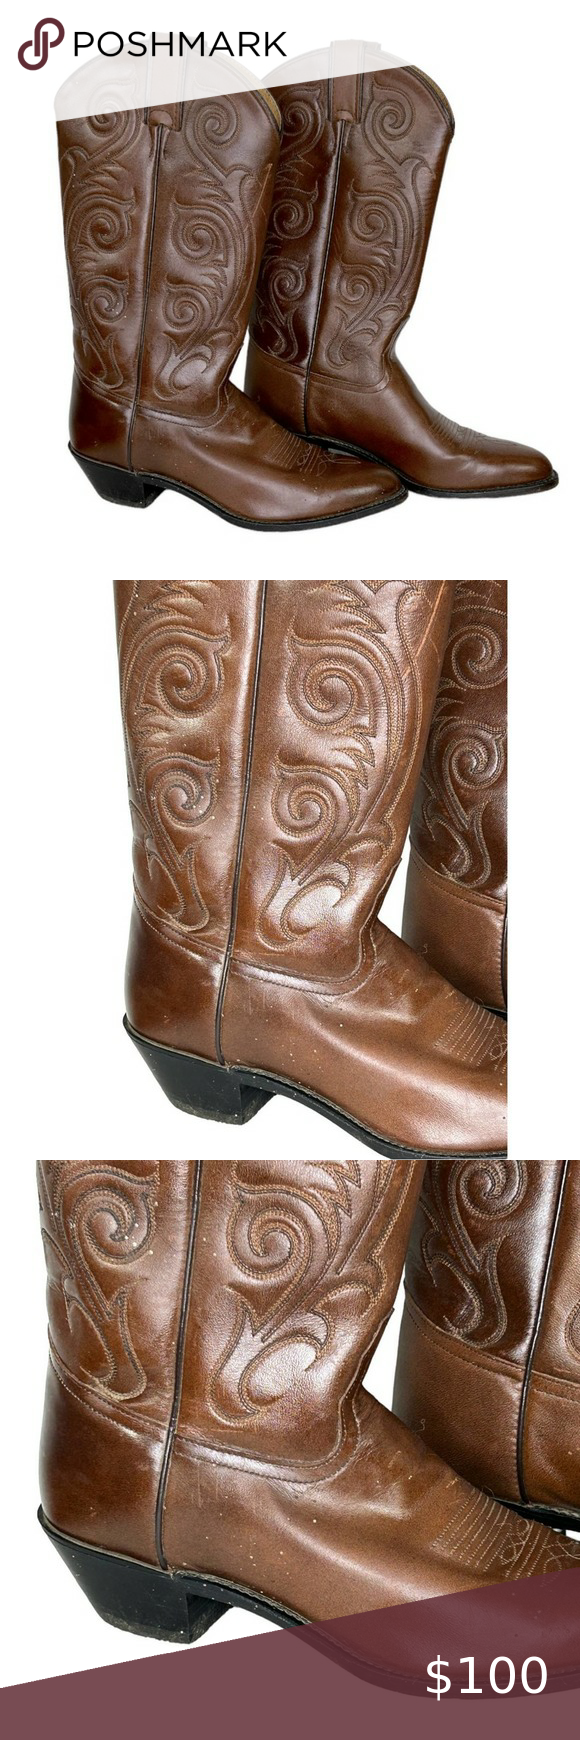 Why People Love To Have Tony Lama Boots